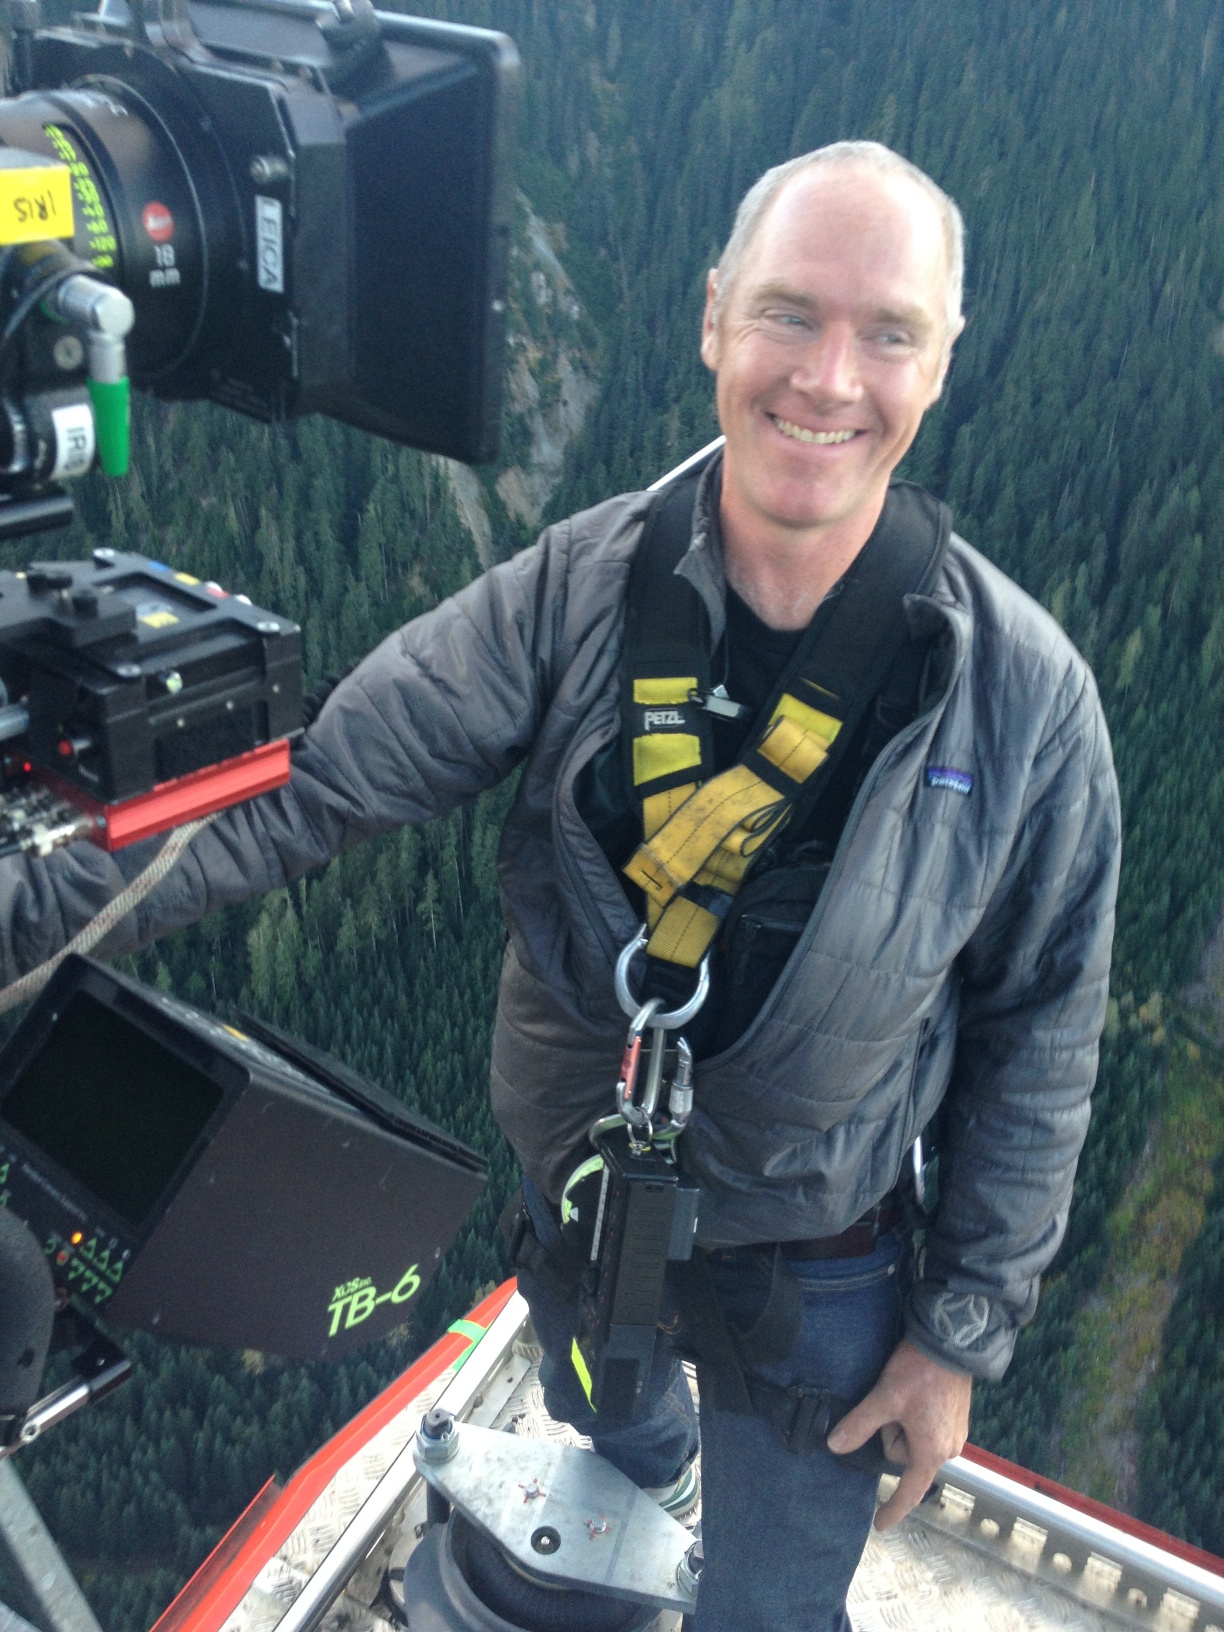 Lincoln job with DP Daniel Landin and Will Arnot steadicam on the roof of Whistlers Peak To Peak Gondola, 450m to the bottom!